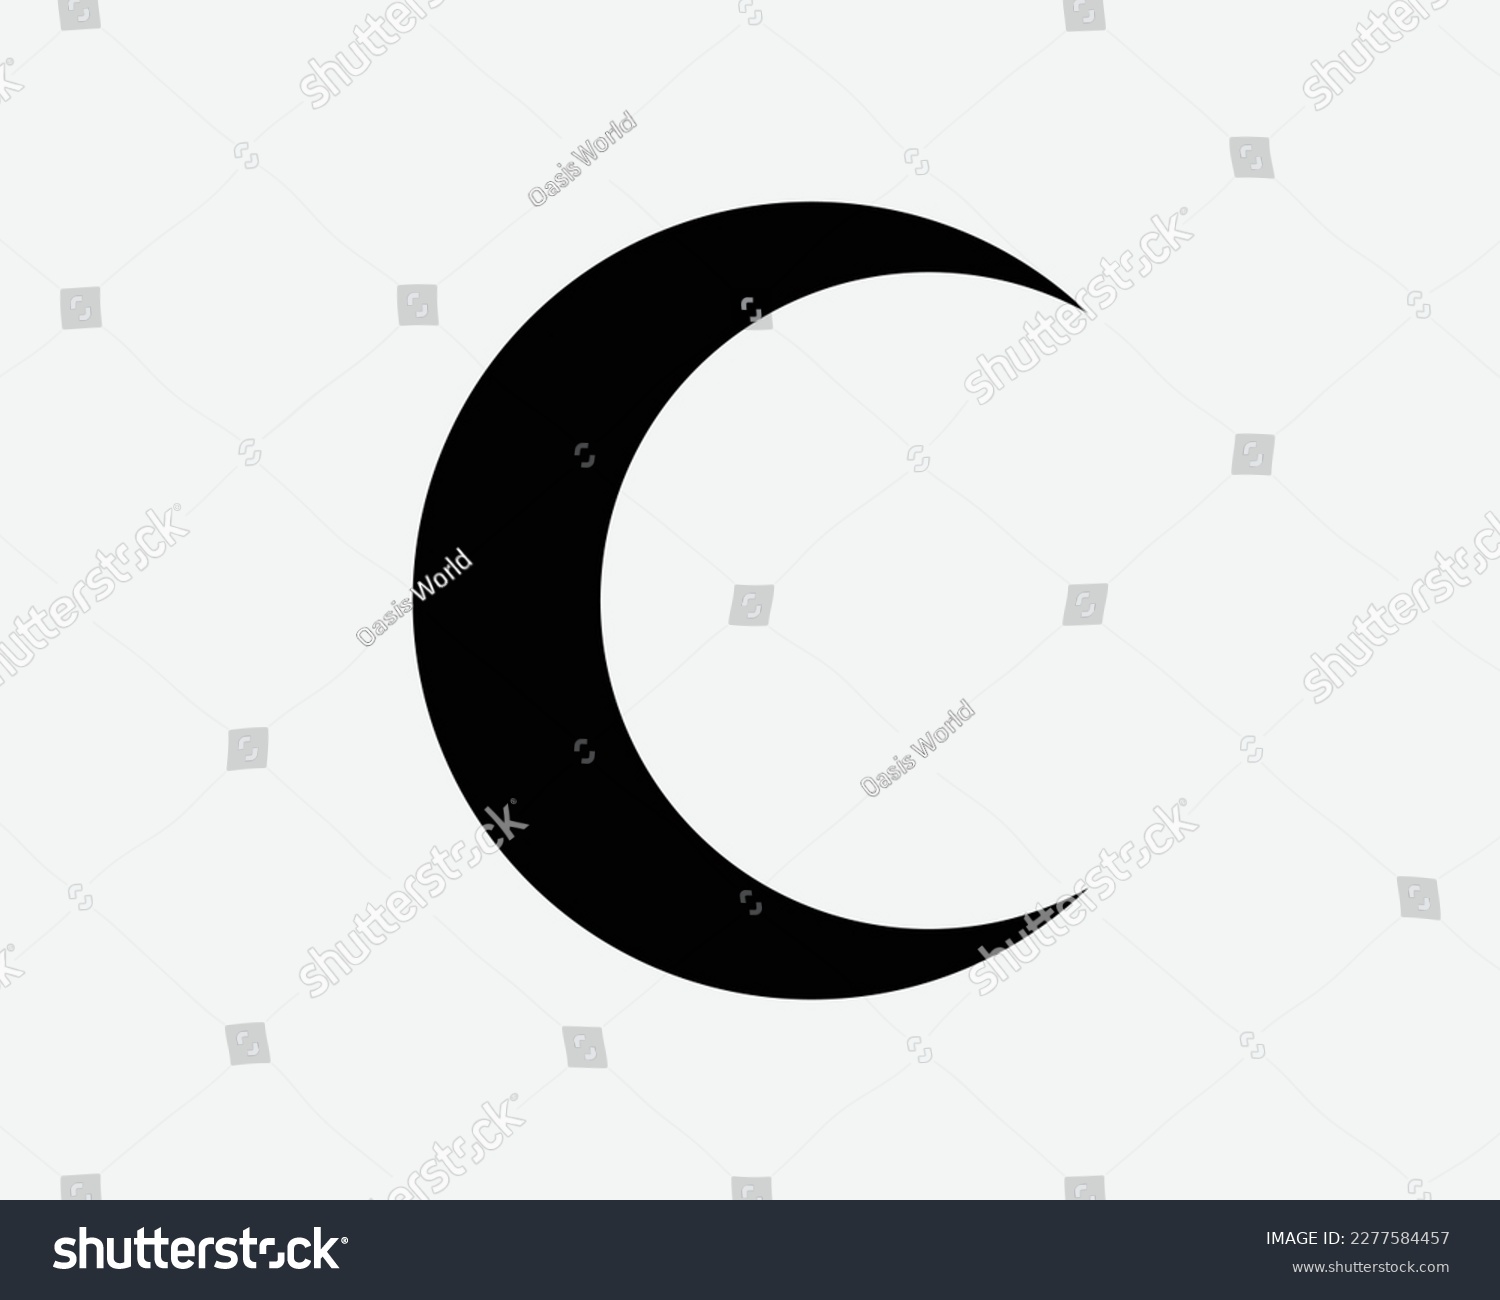 SVG of Crescent Symbol Lunar Moon Shape Islam Islamic Muslim Emblem First Aid Black and White Sign Icon Vector Graphic Clipart Illustration Artwork Pictogram svg